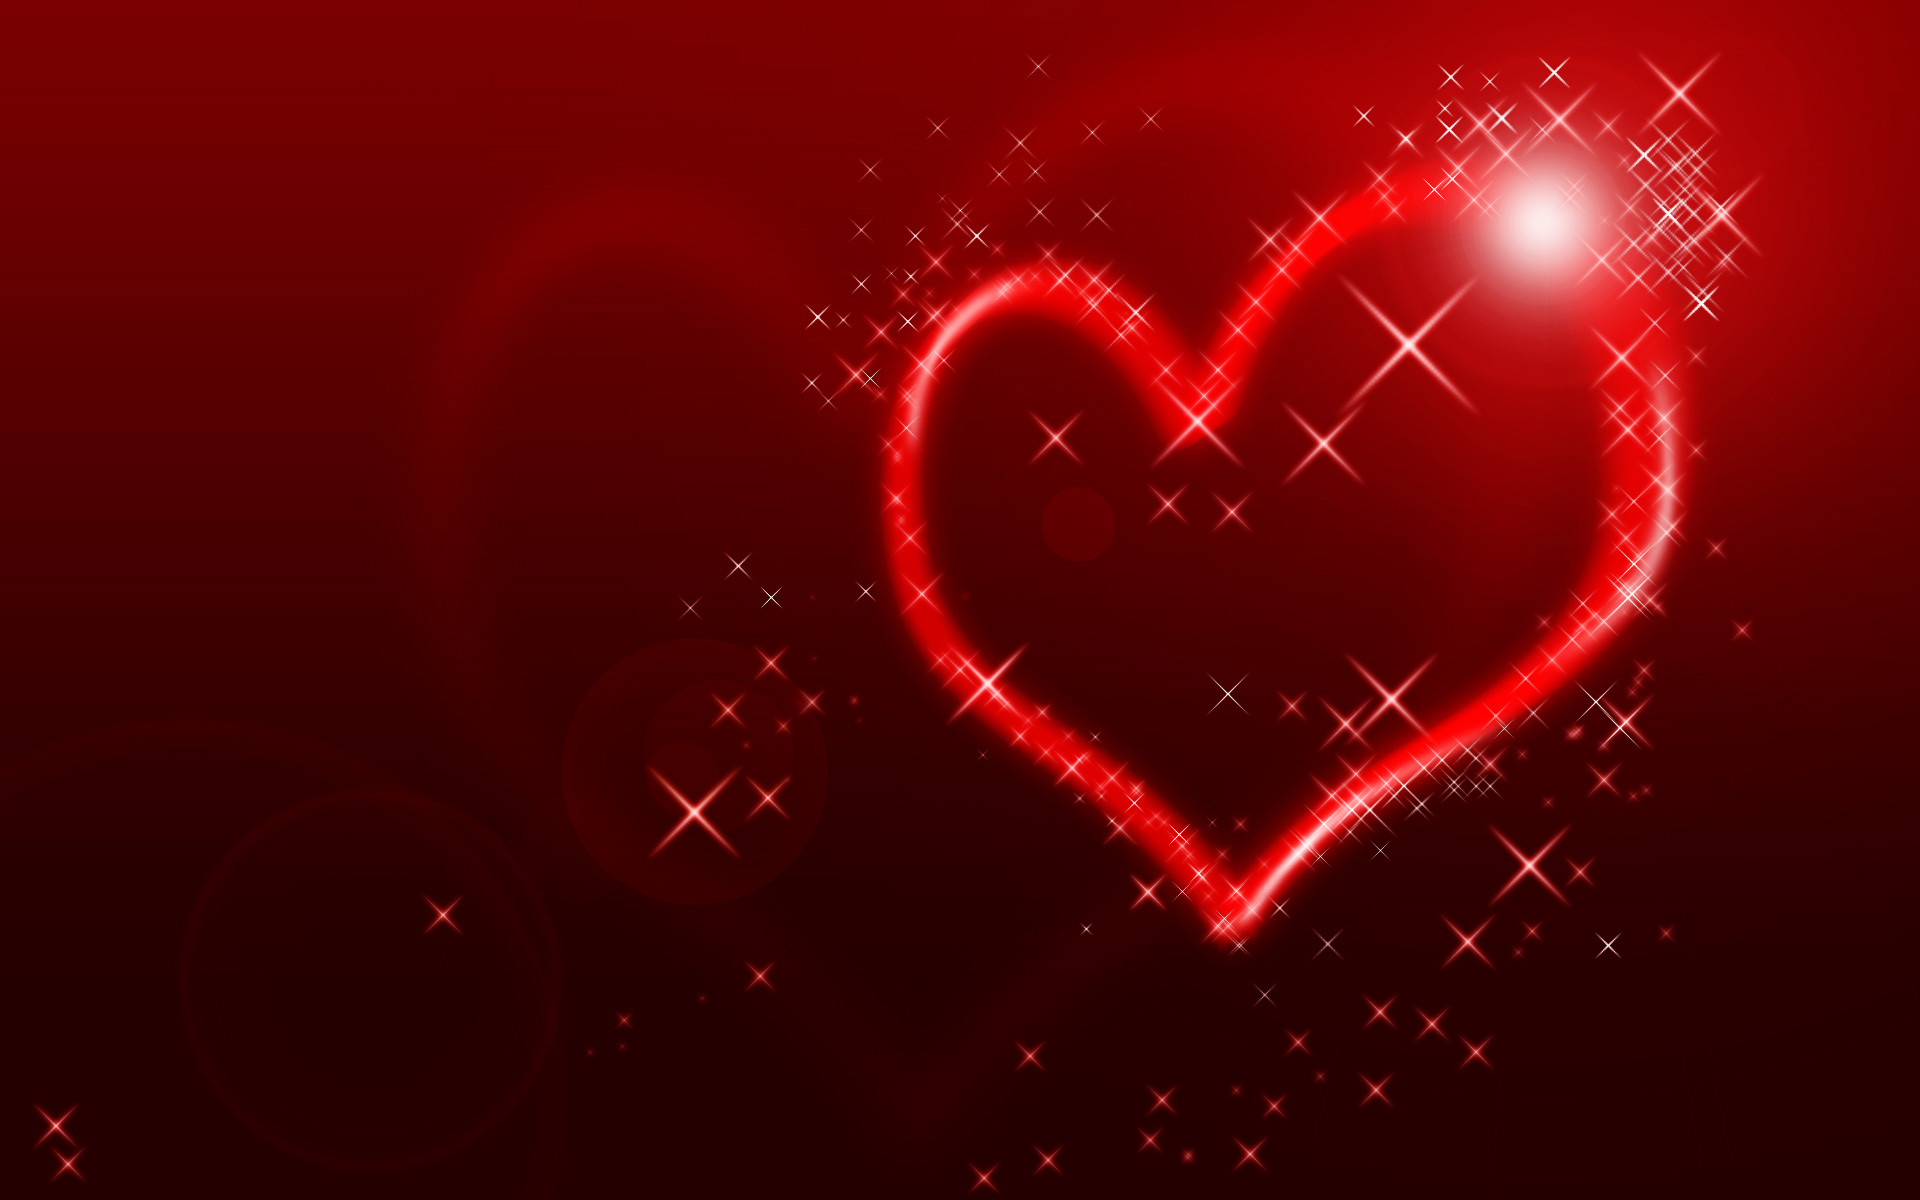 Create an abstract Valentine background with hearts